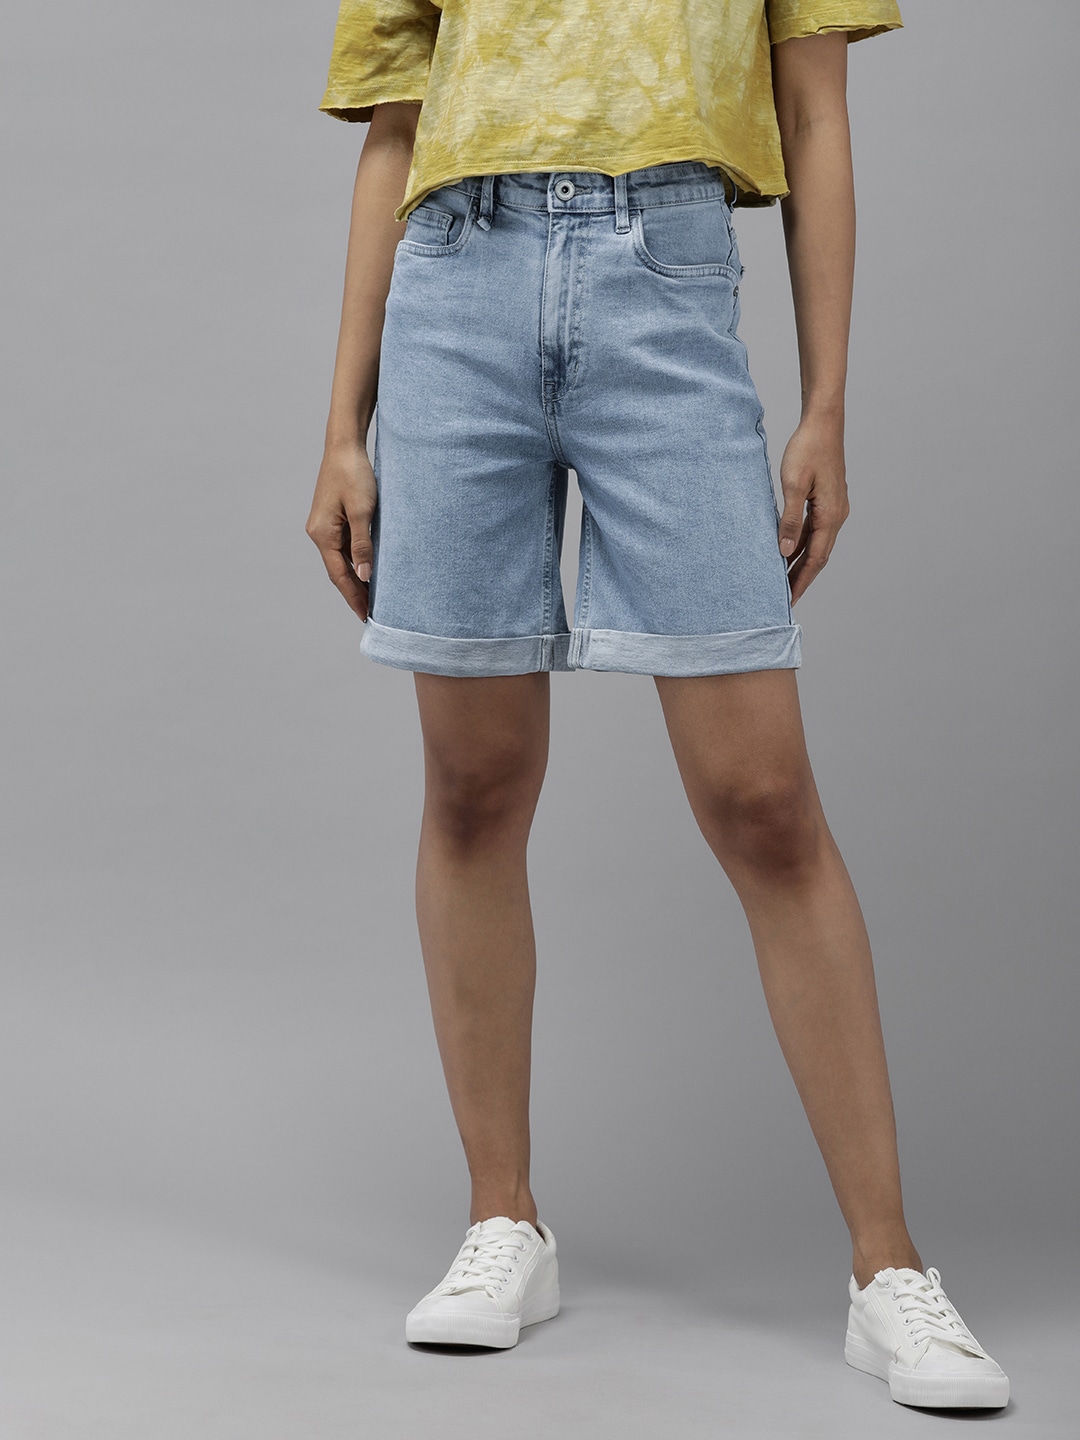 The Roadster Lifestyle Co. Women Solid High-Rise Denim Shorts Price in India